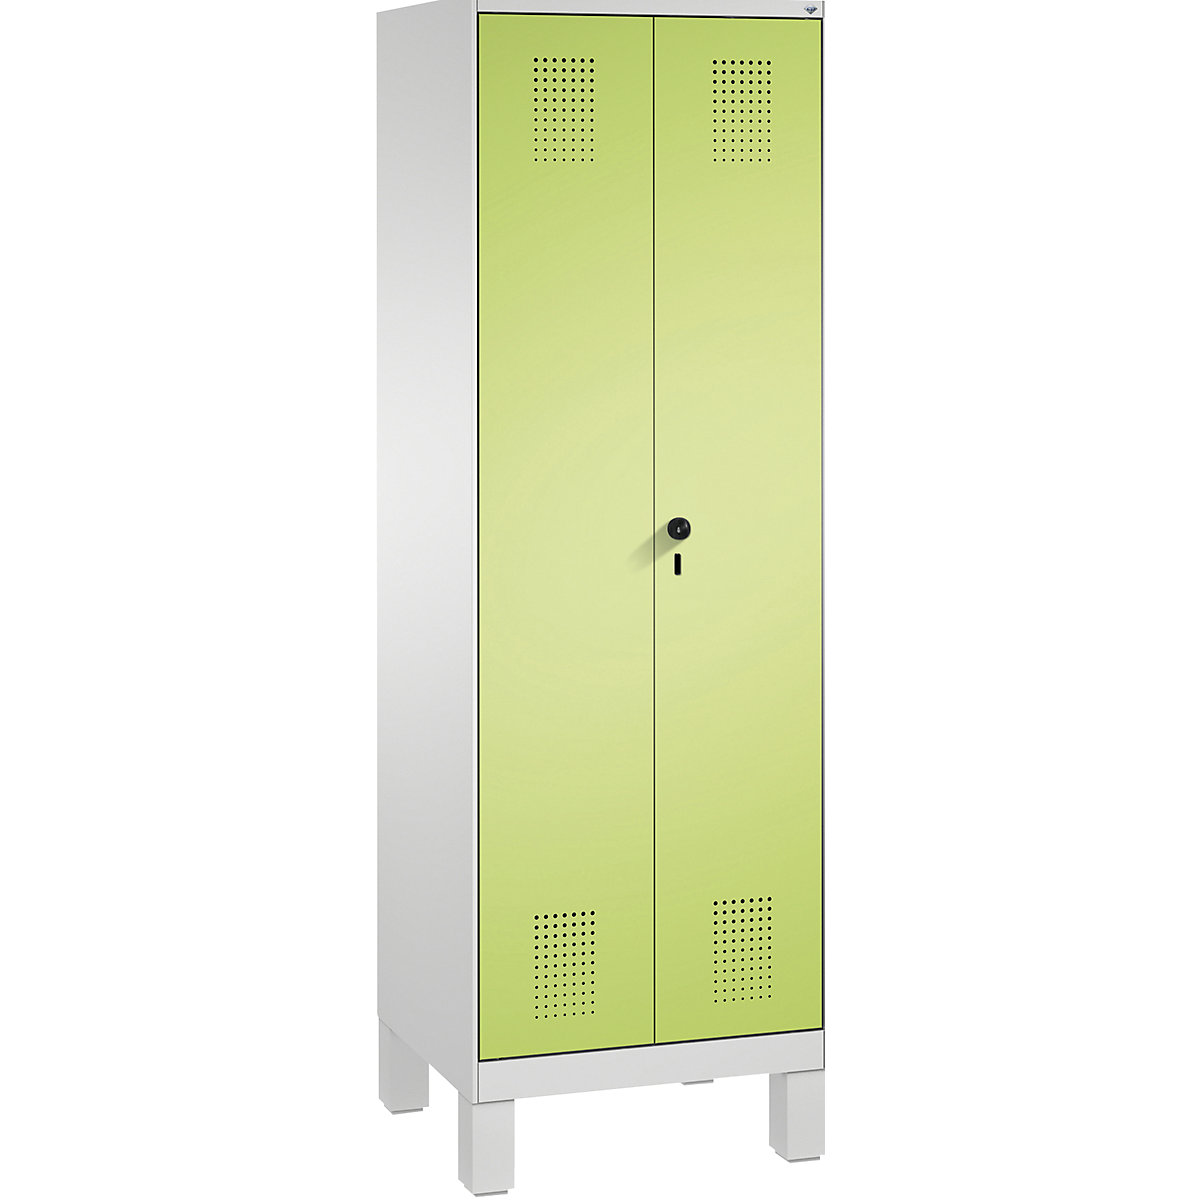 EVOLO storage cupboard, doors close in the middle, with feet – C+P, 2 compartments, 8 shelves, compartment width 300 mm, light grey / sulphur yellow